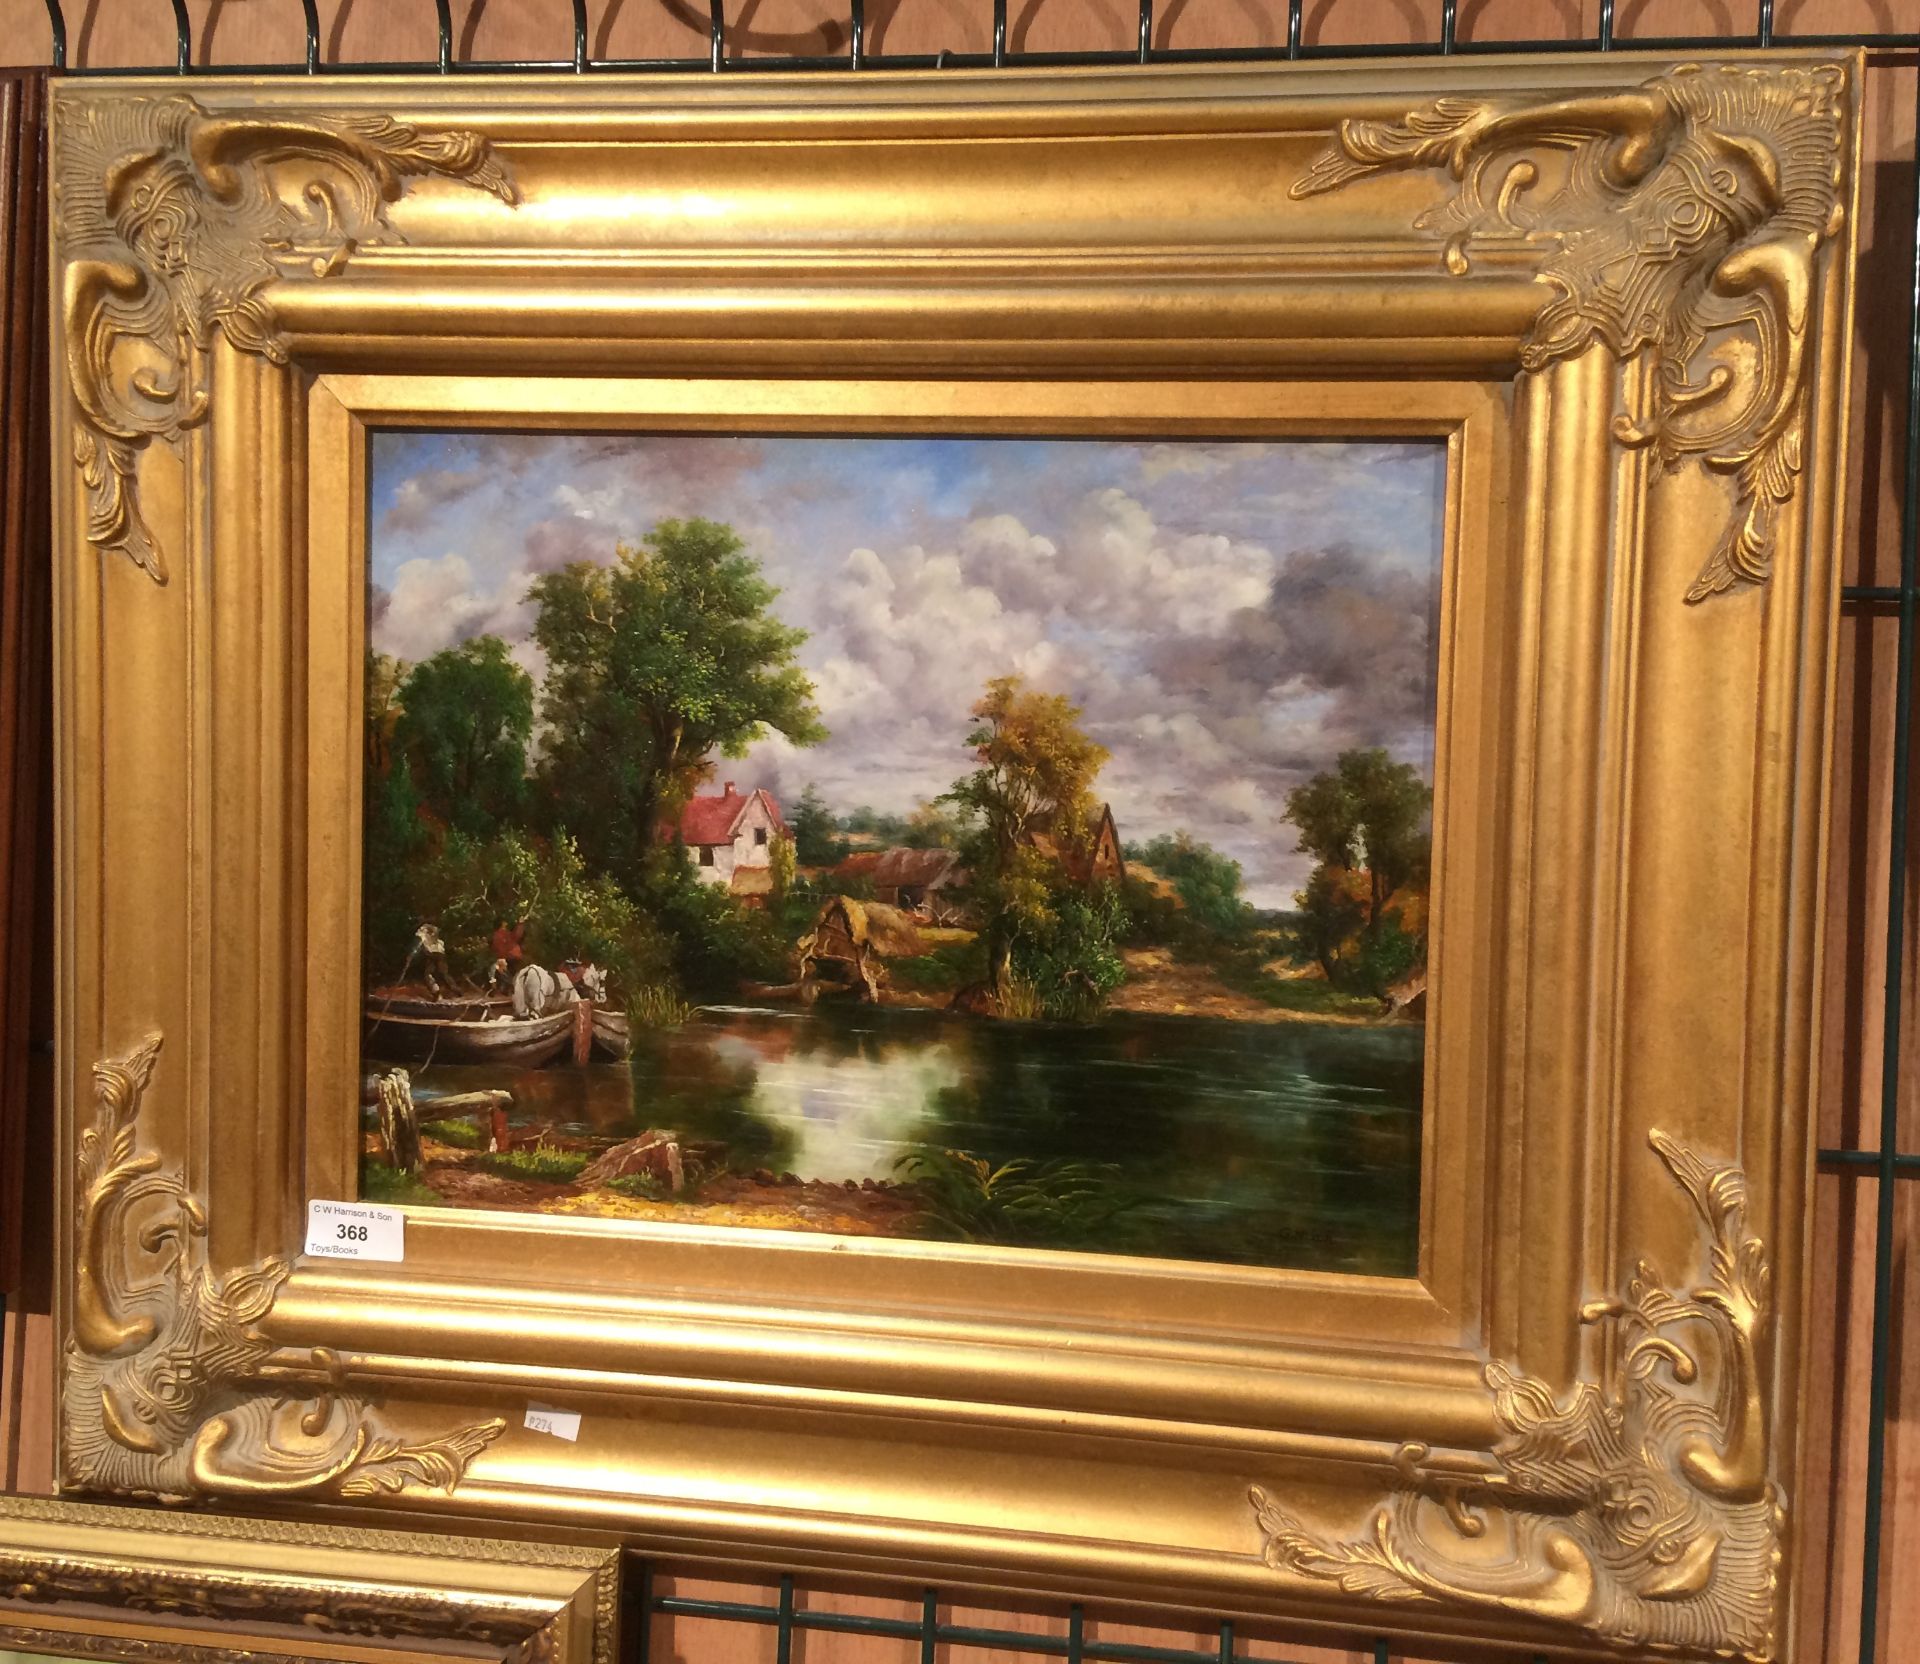 J Nixon ornate gilt framed oil painting in the style of Constable 'River Crossing' 30 x 46cm with